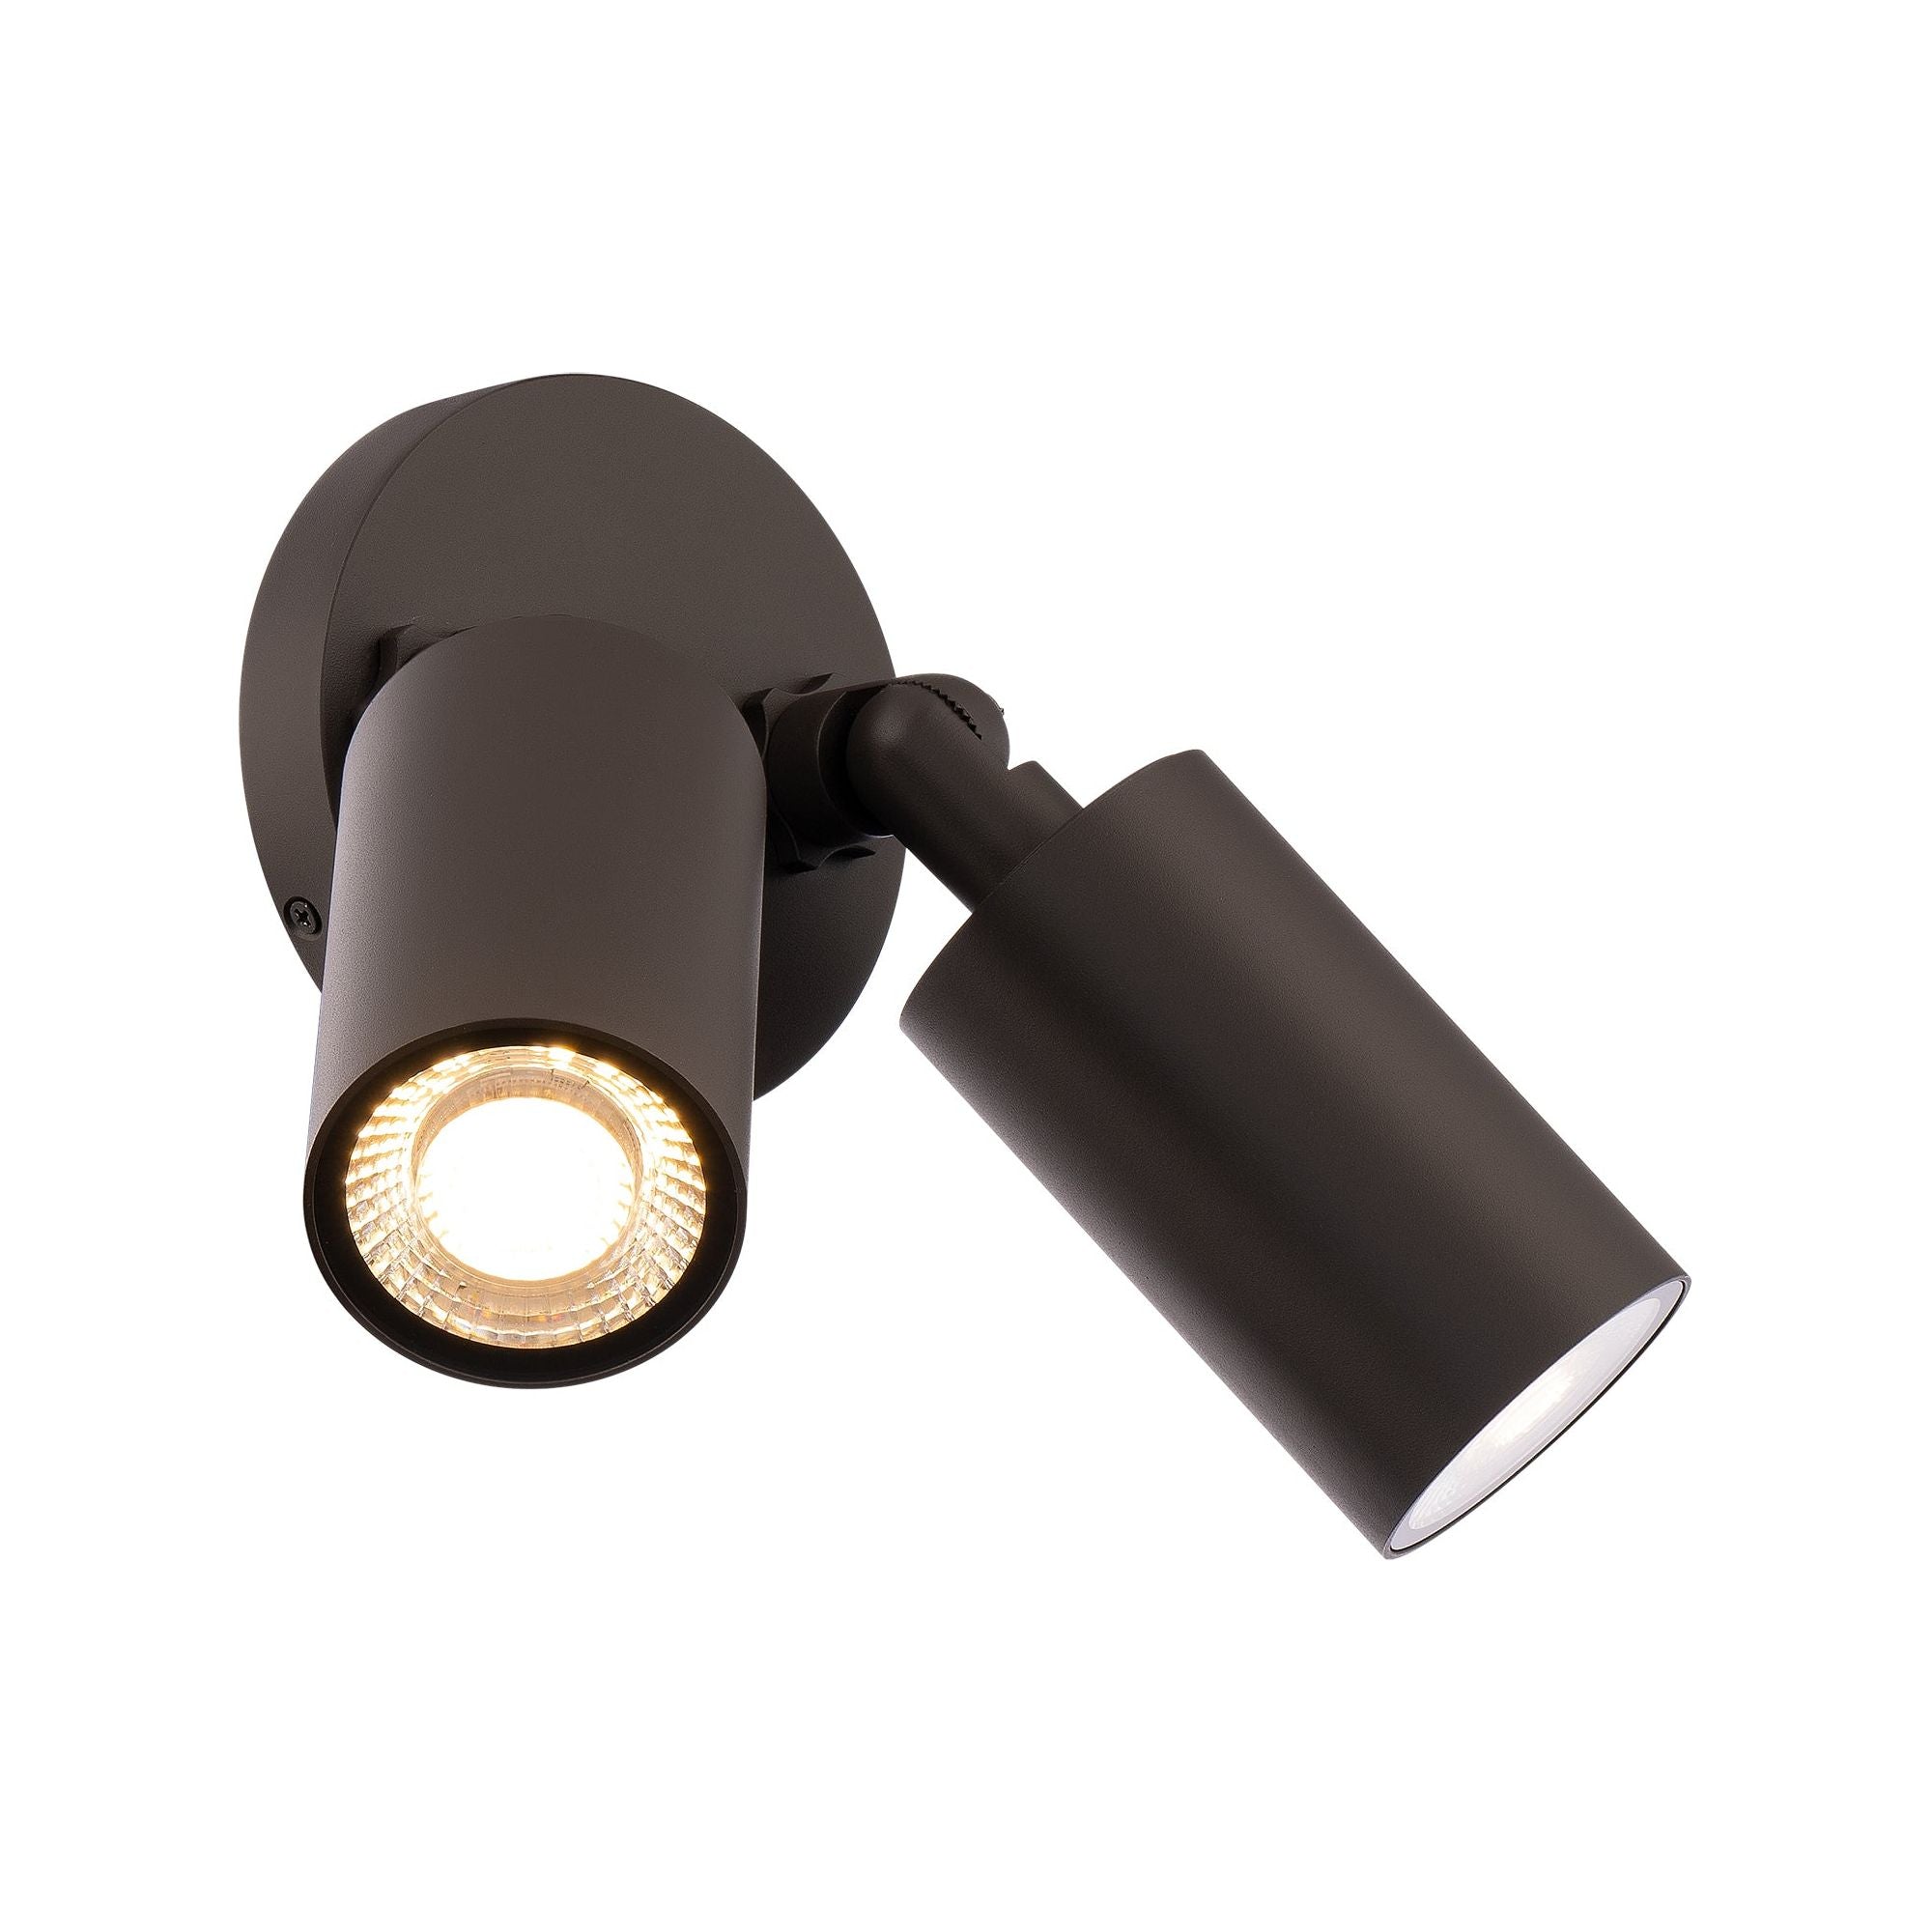 Cylinder LED Double Adjustable Indoor/Outdoor Wall Light